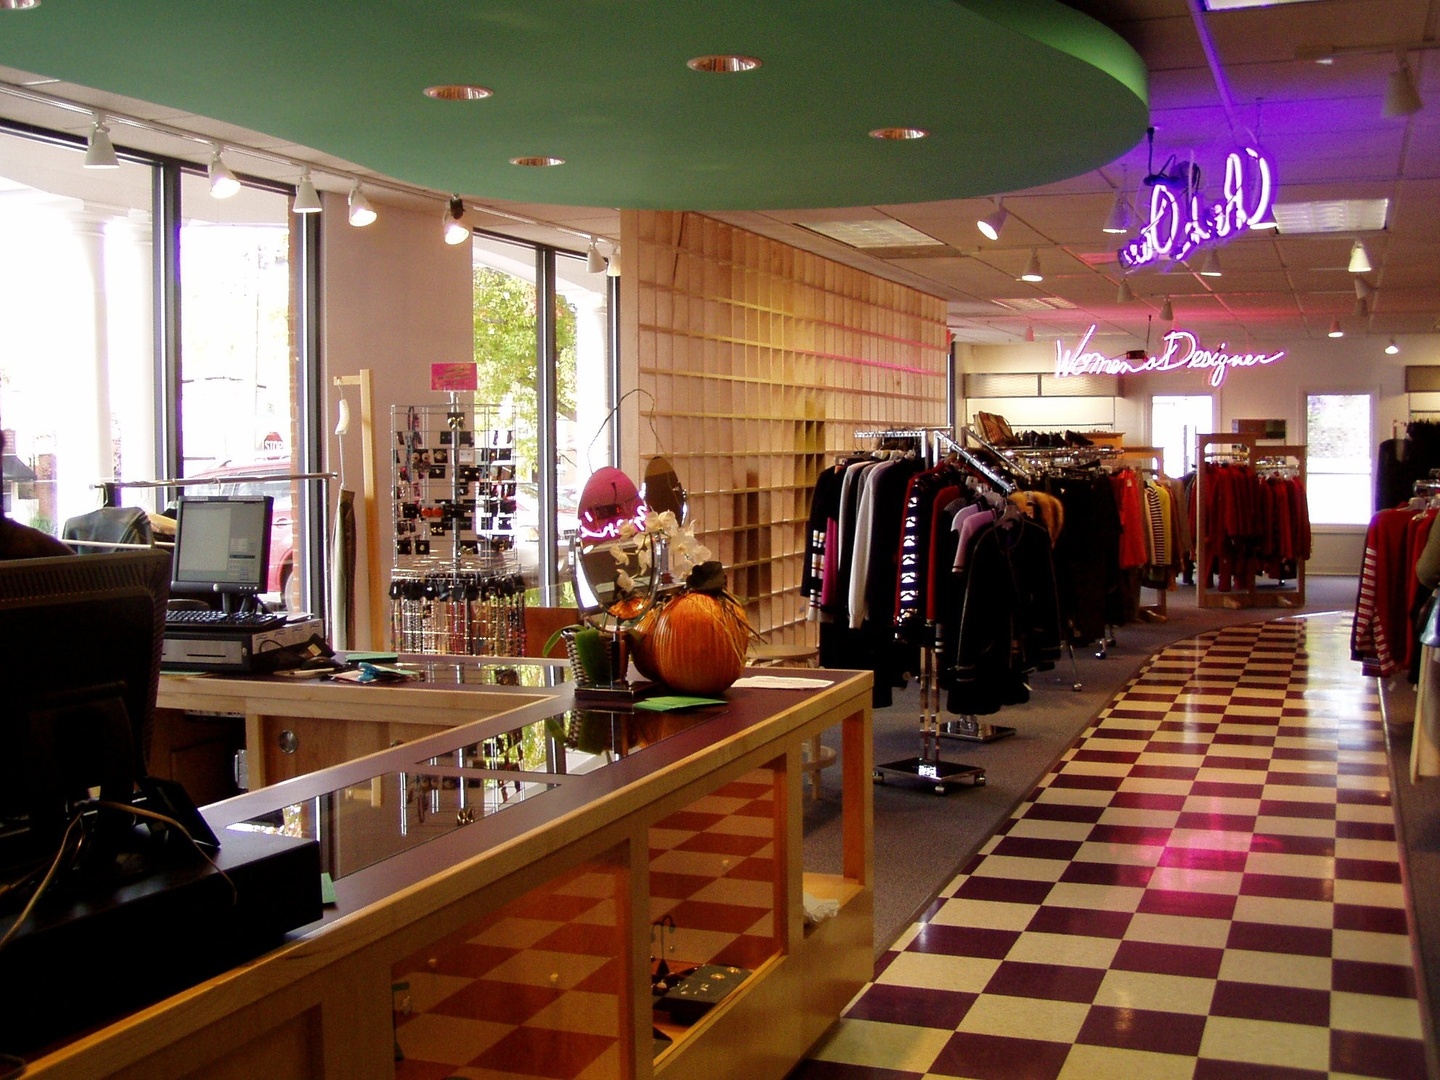 An interior view of the retail shop with a counter and register int eh foreground, checkered flooring, and neon signage descriptive of the clothing for sale